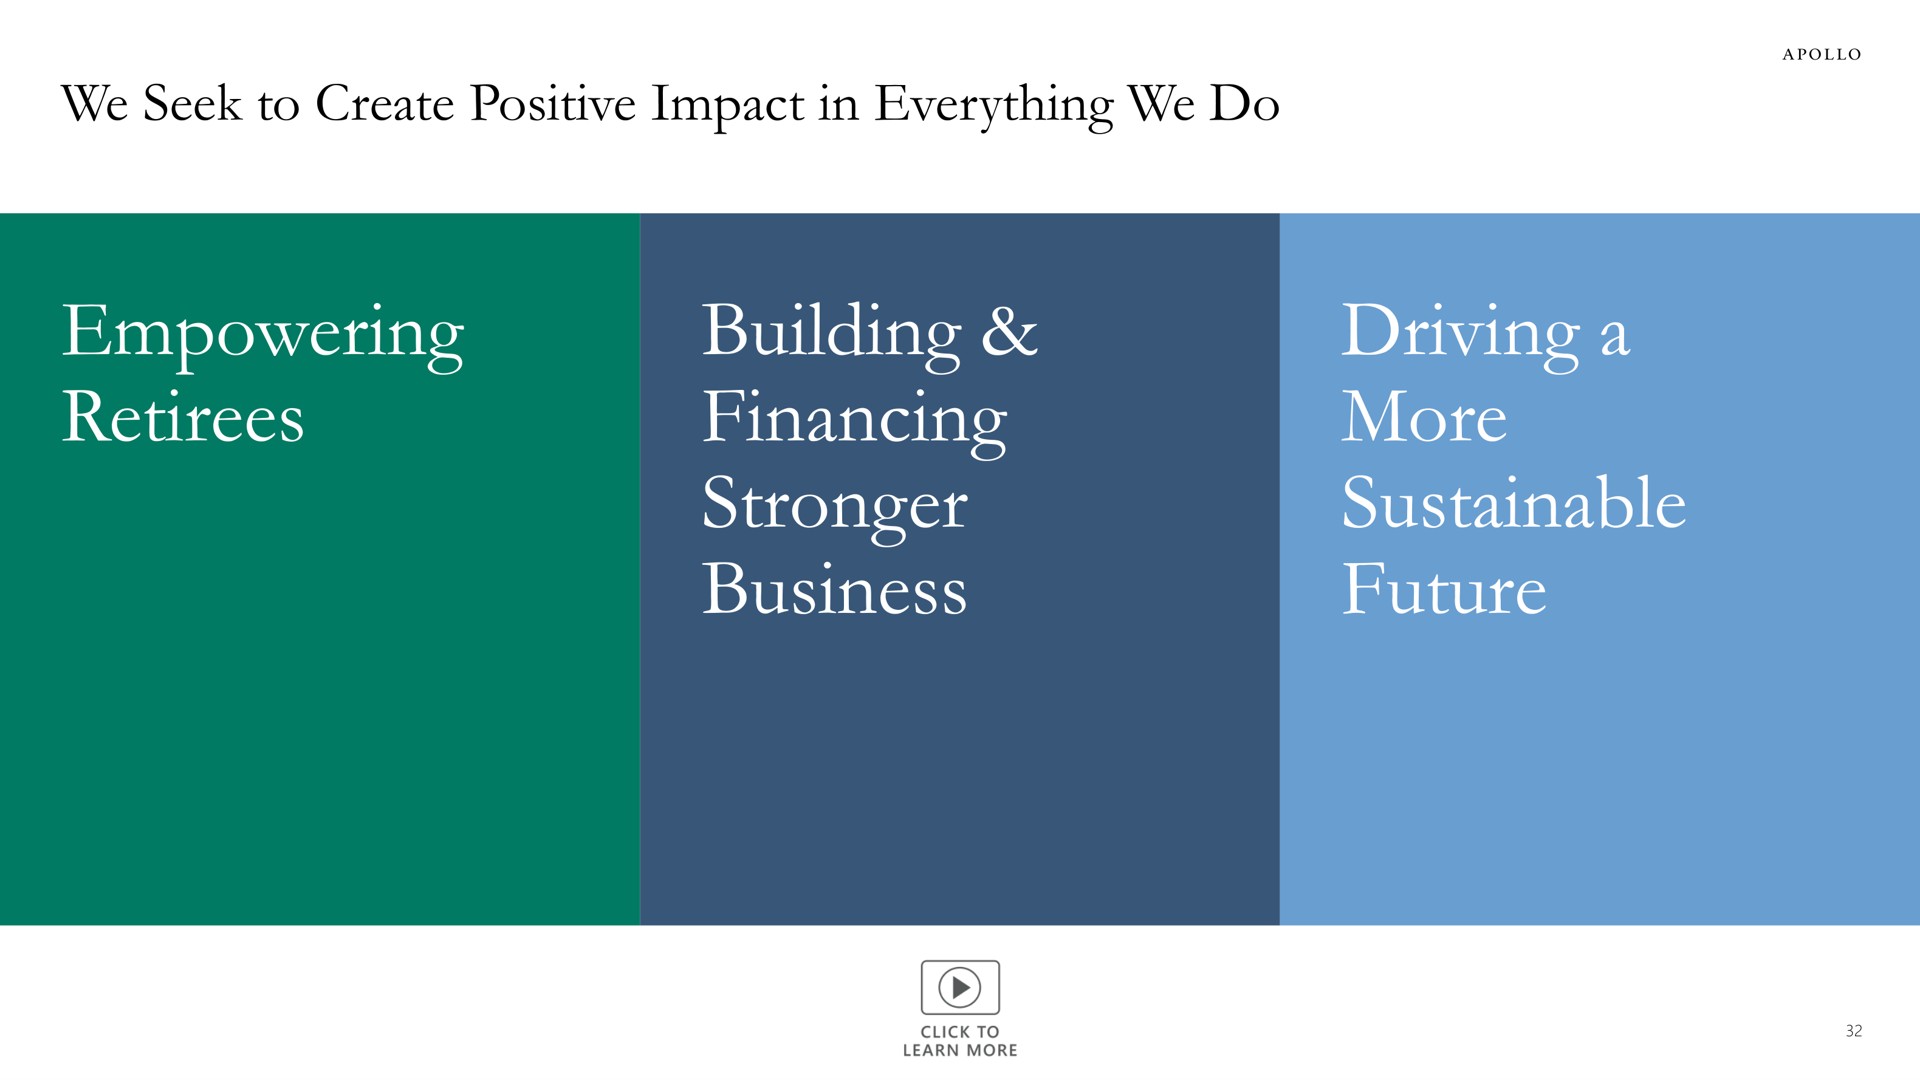 we seek to create positive impact in everything we do empowering retirees building financing business driving a more sustainable future | Apollo Global Management